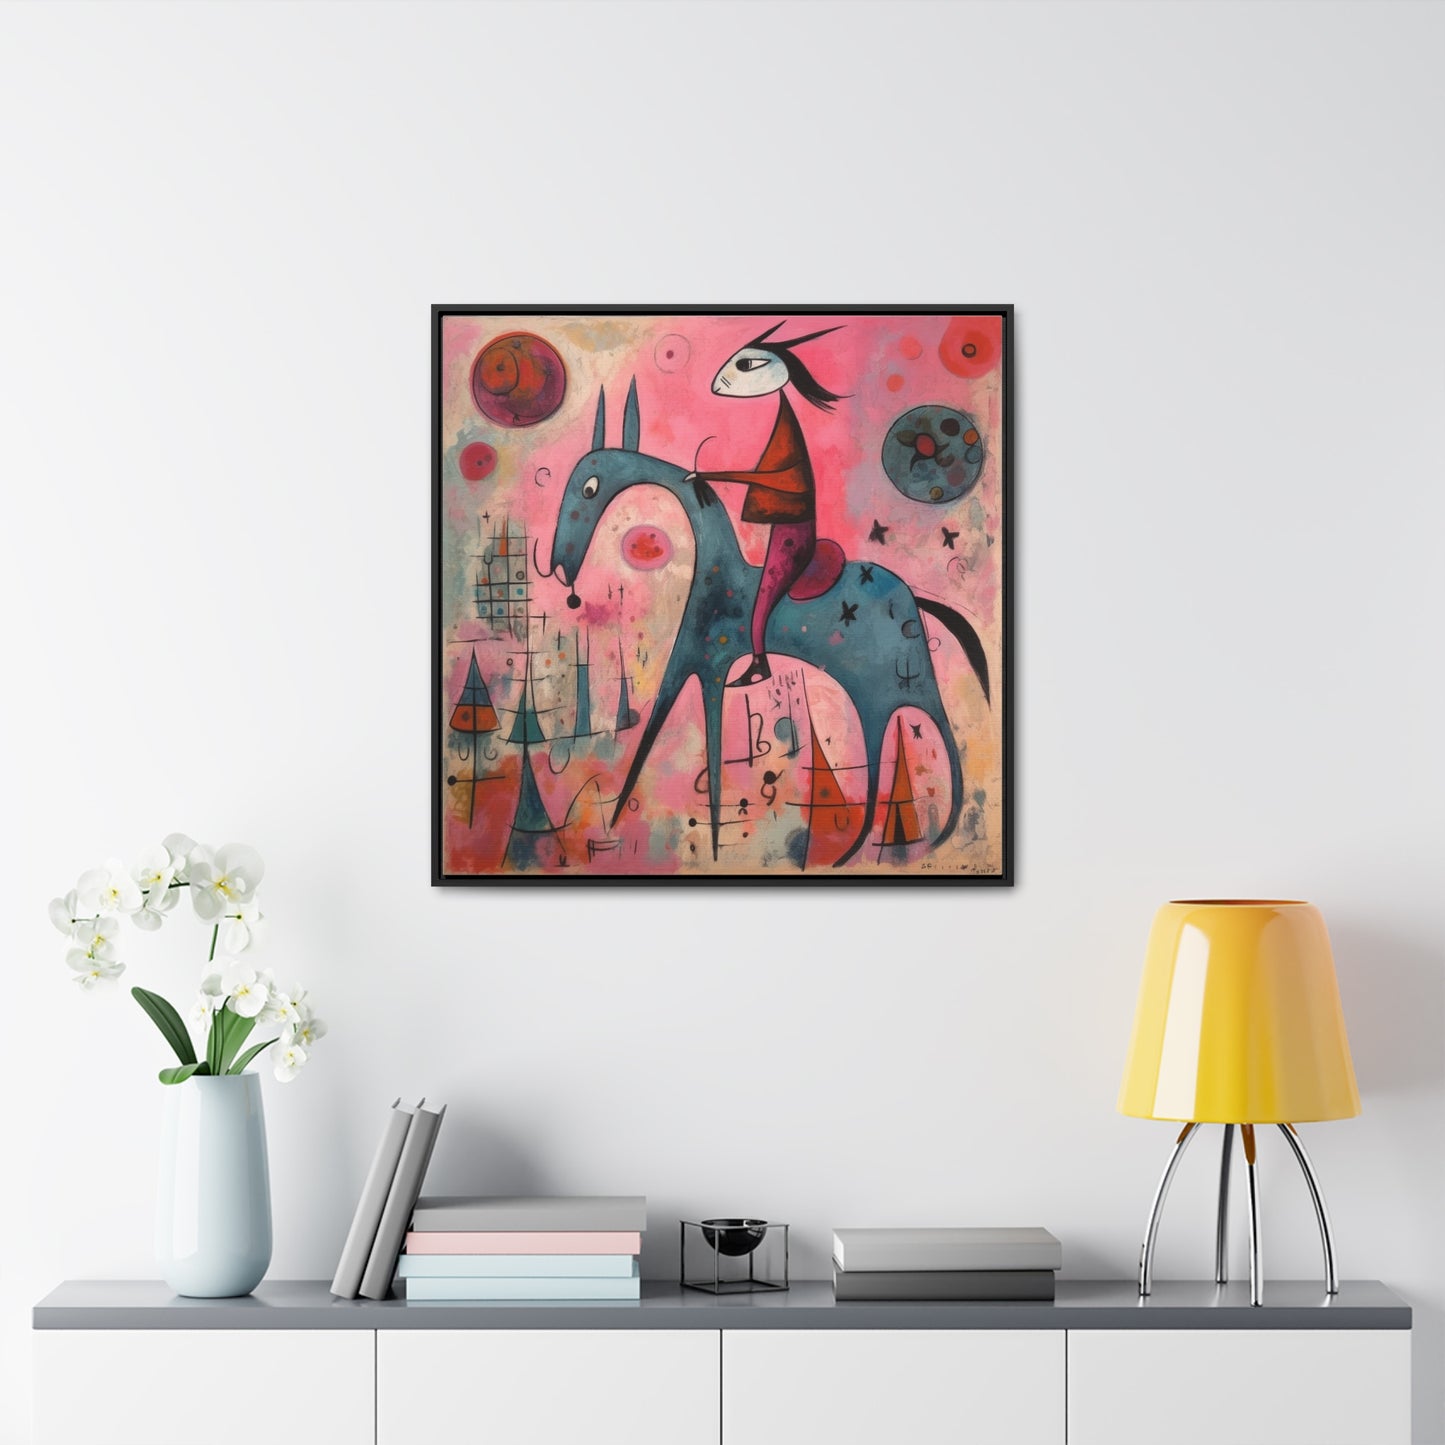 The Dreams of the Child 53, Gallery Canvas Wraps, Square Frame